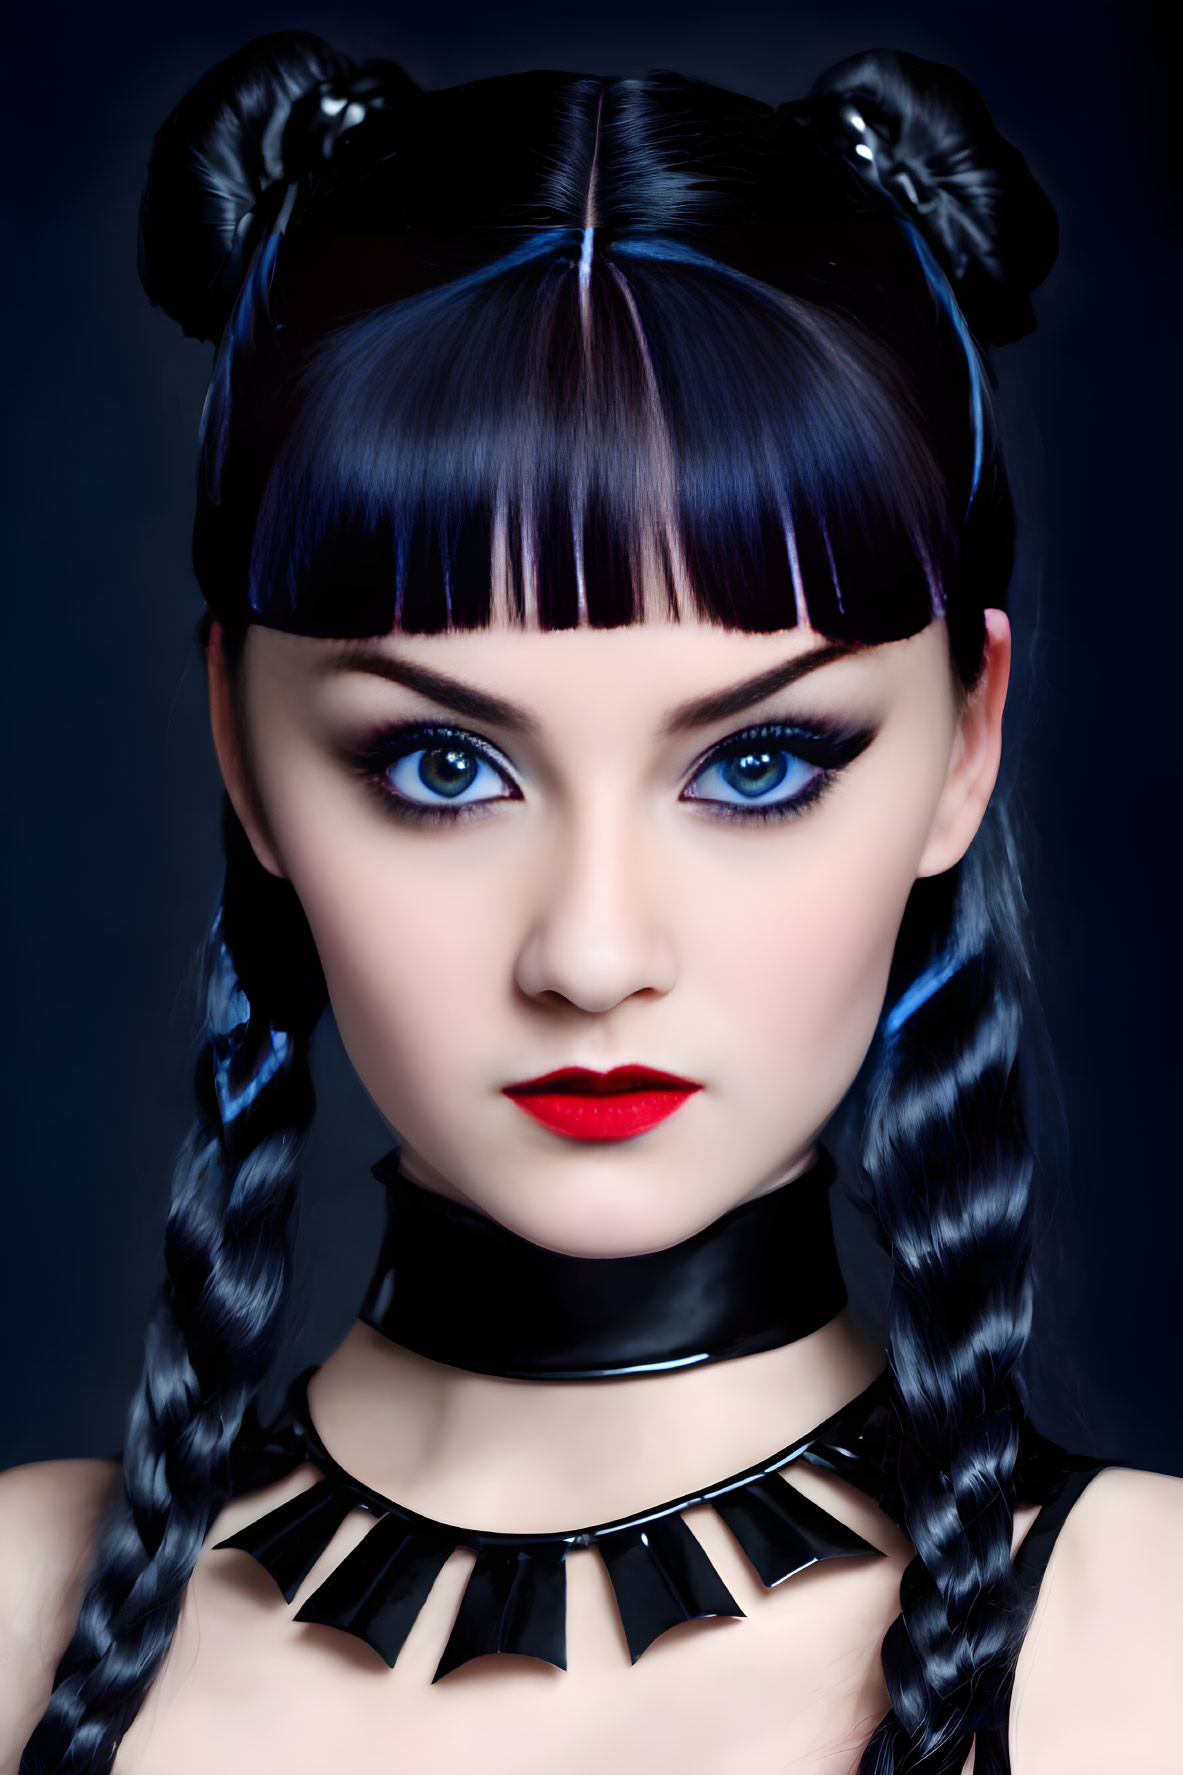 Portrait of a person with blue eyes, blue hair in buns and braids, bold makeup,